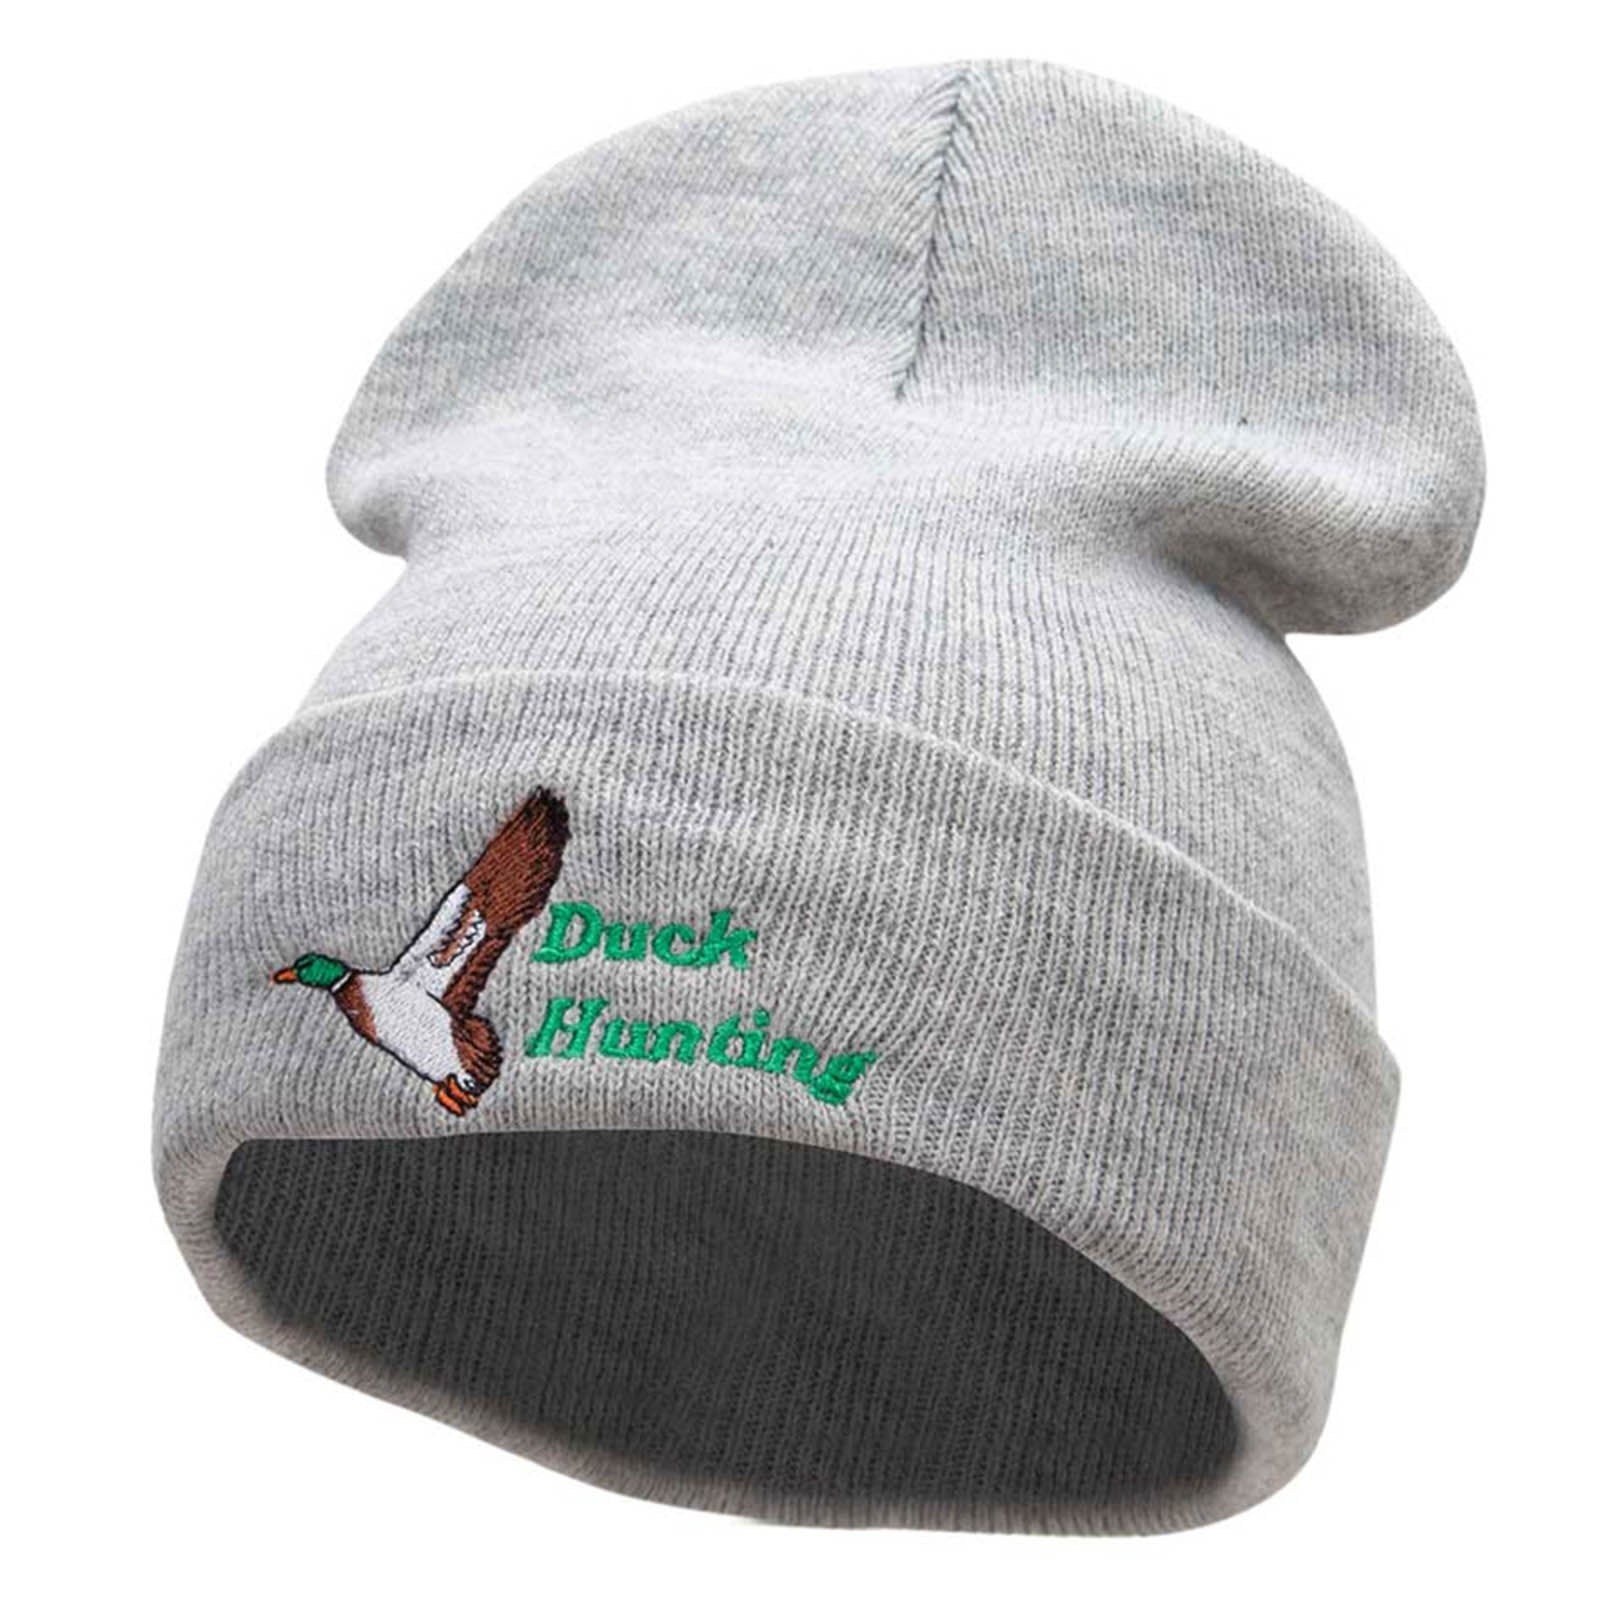 Duck Hunting Season Embroidered 12 Inch Long Knitted Beanie - Heather Grey OSFM